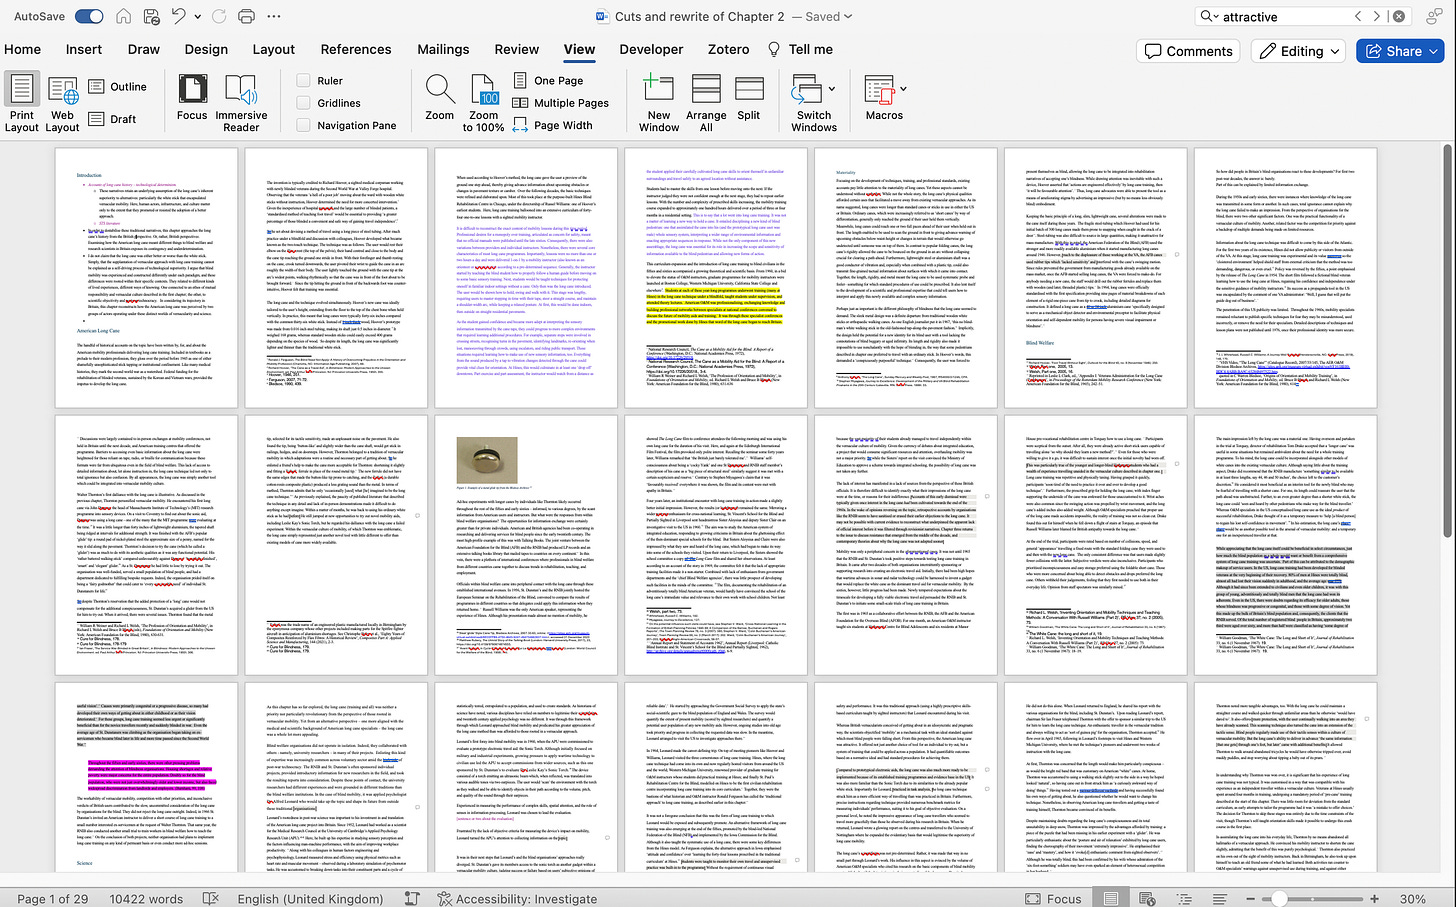 Screenshot of a Microsoft Word document, zoomed out to show 21 pages of text in black and purple text, a photograph of a metal glide tip, and a few sections highlighted in yellow and pink.